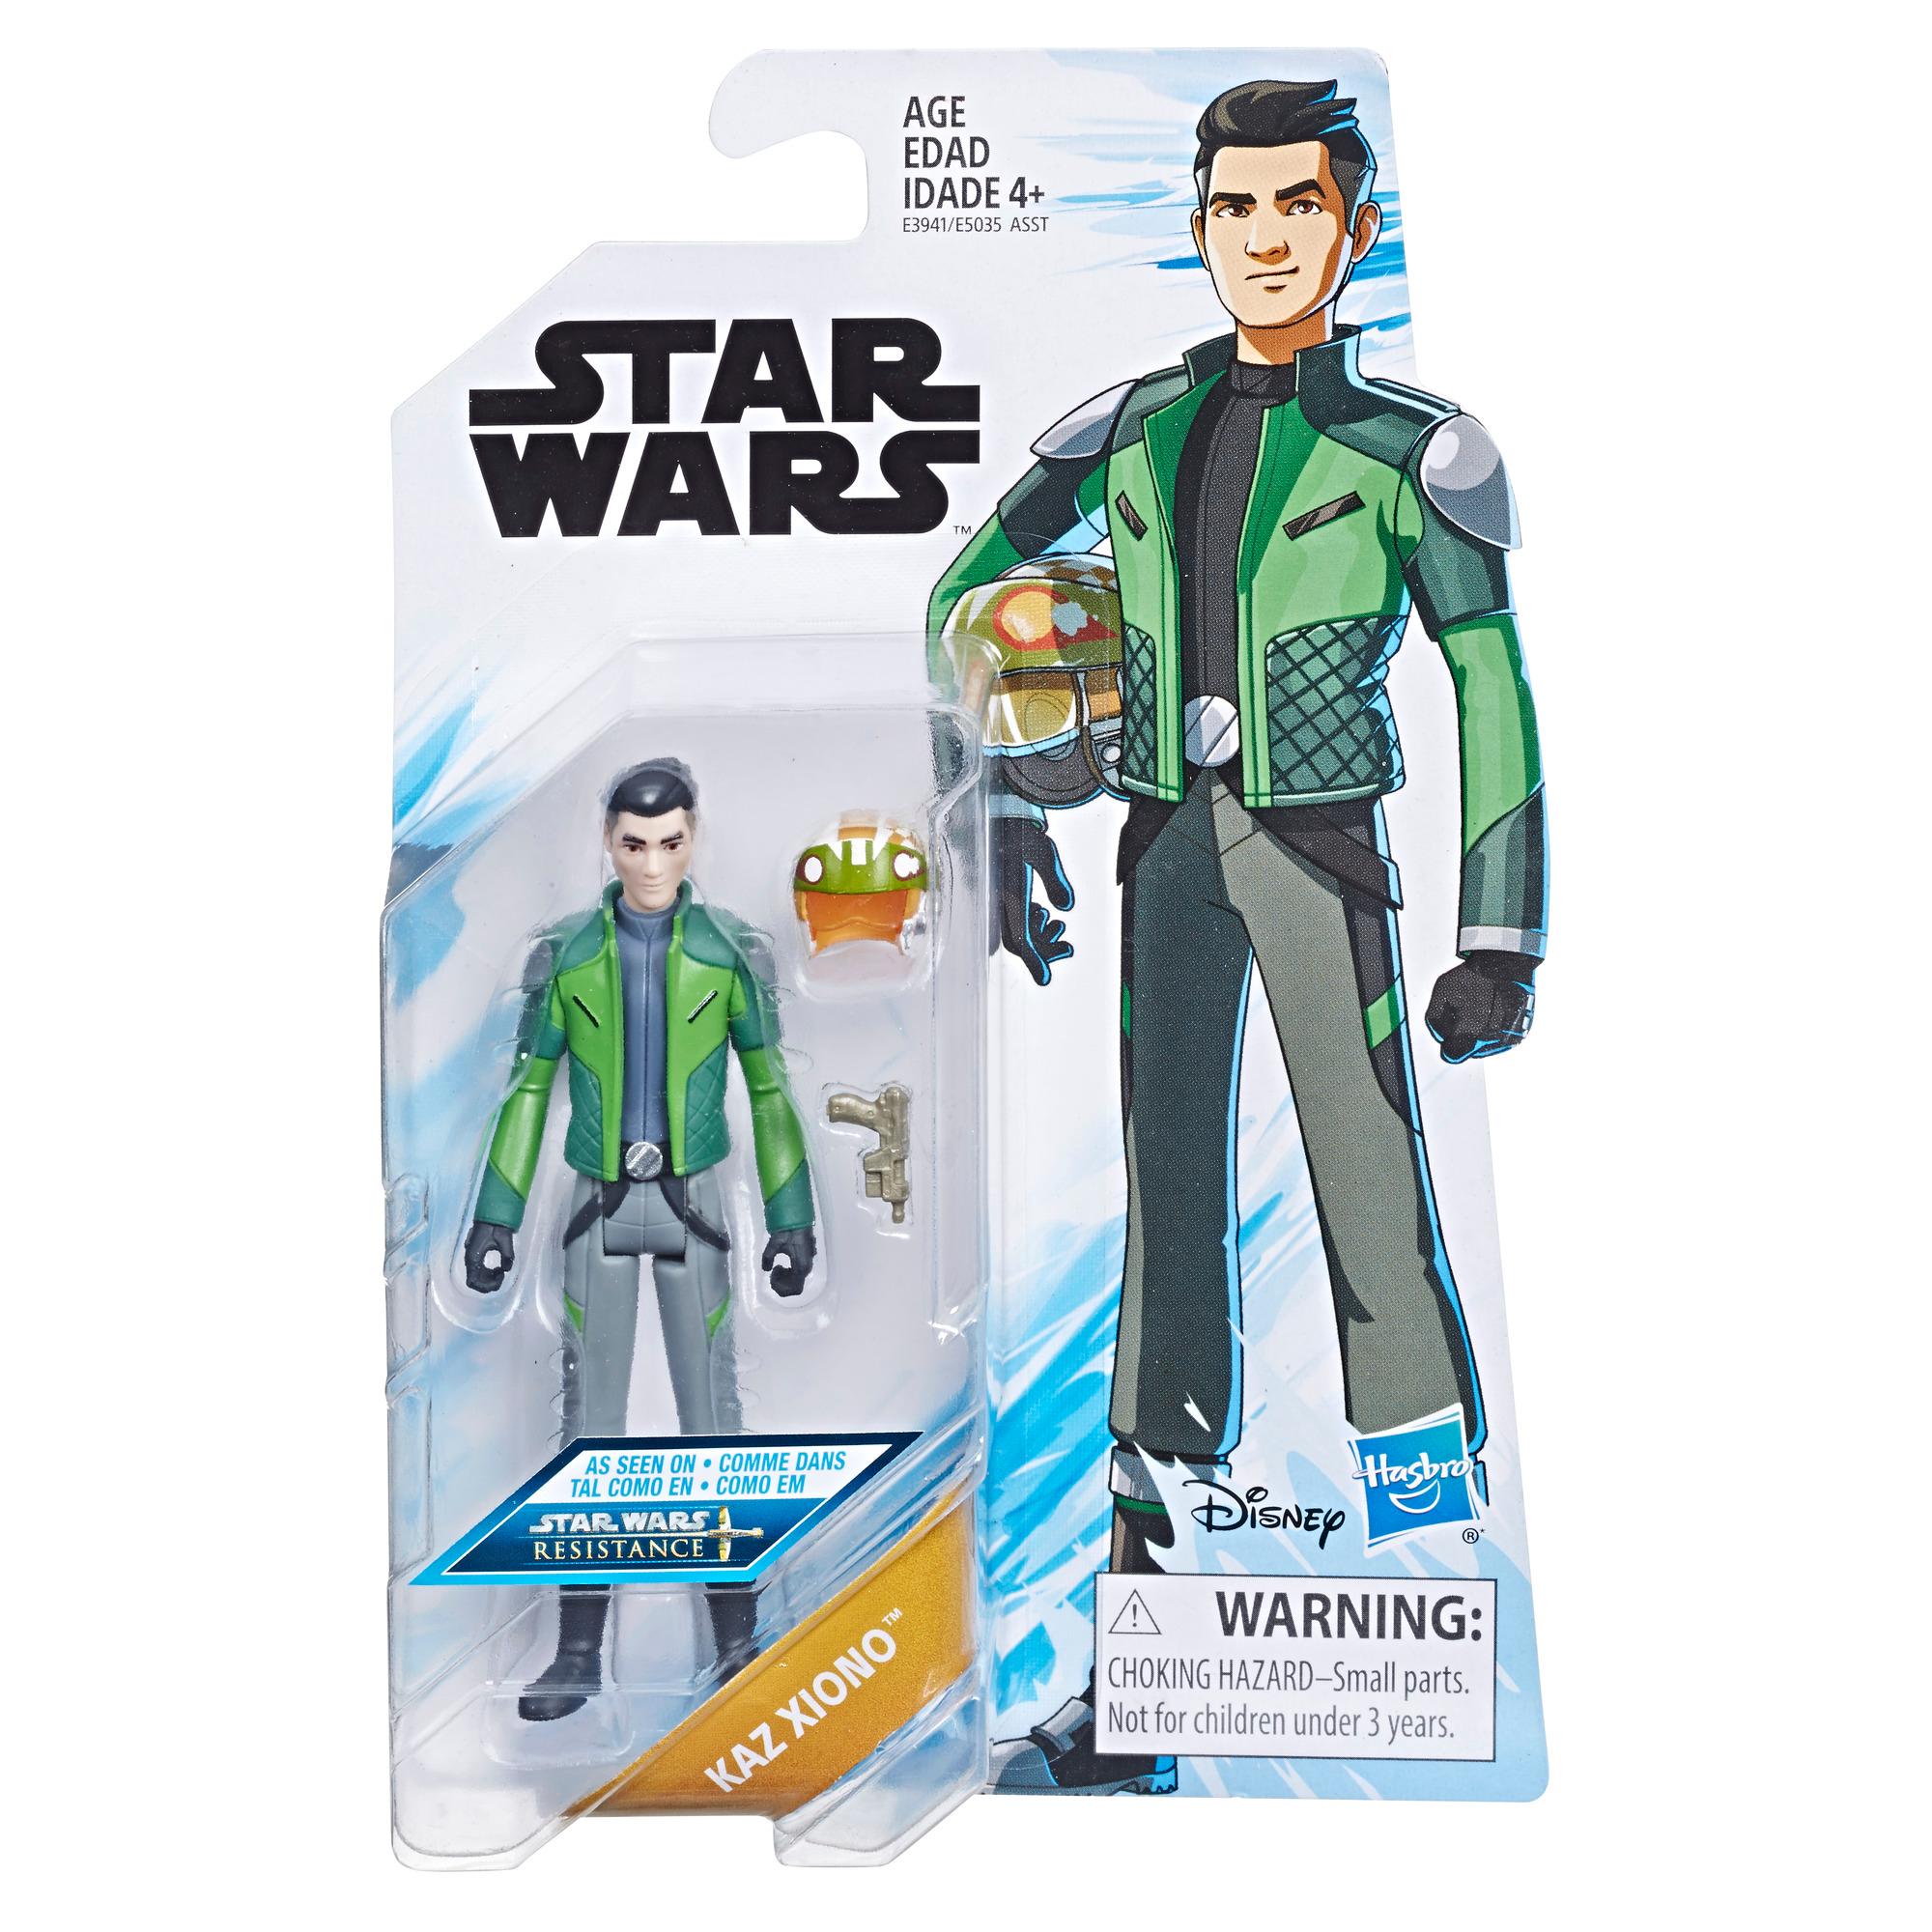 NEW MIP 5 STAR WARS Action Figures RESISTANCE Animation 2018 CHARACTERS 